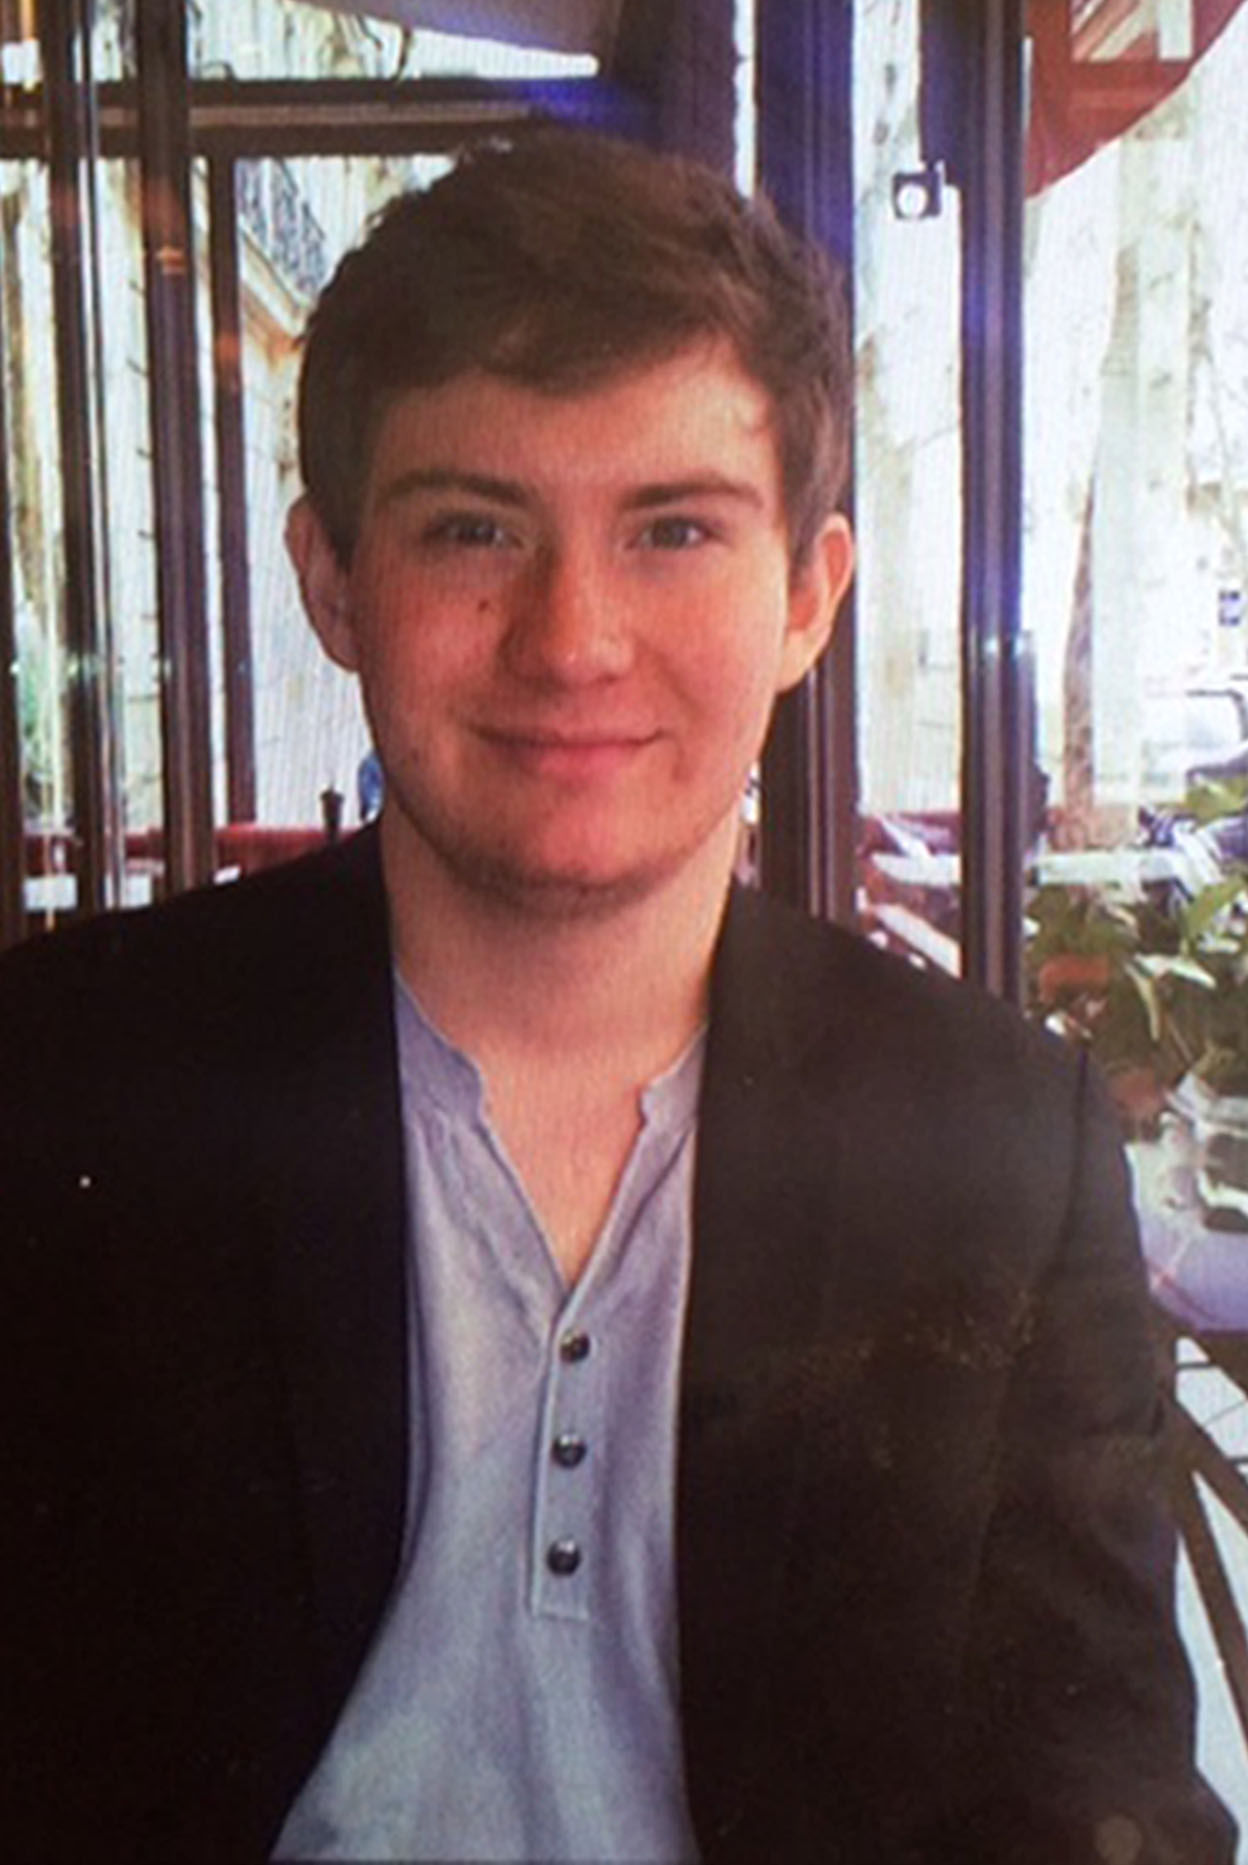 Parents in desperate appeal to trace missing French student